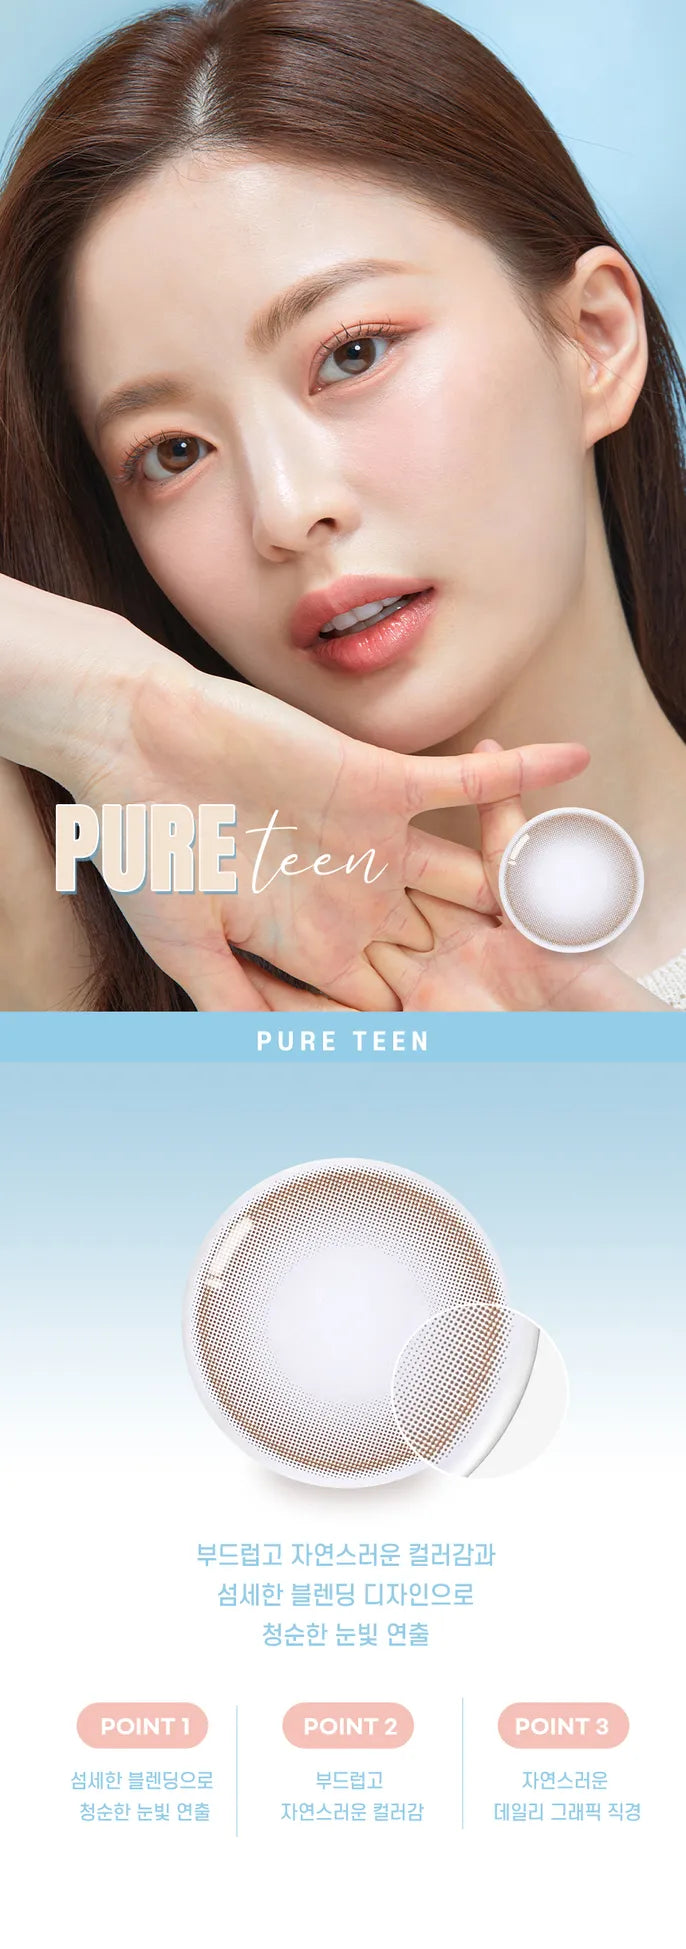 O-Lens Pure Teen Brown | 1 Month